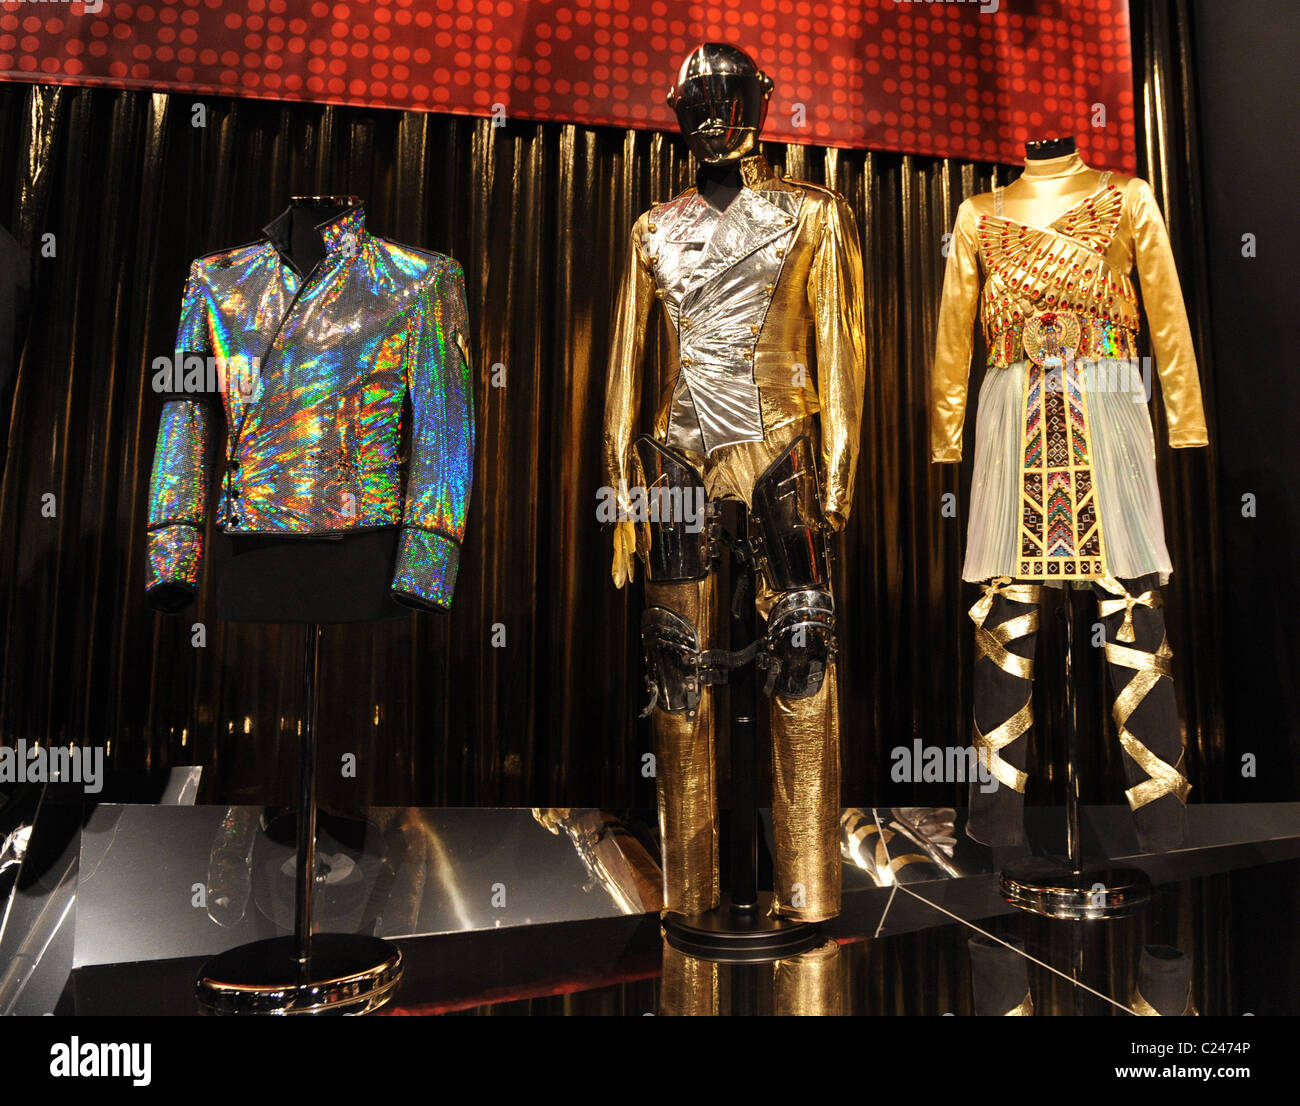 Outfits - Clothing Michael Jackson's 'This Is It' Exhibition at the O2  Arena London, England  Stock Photo - Alamy